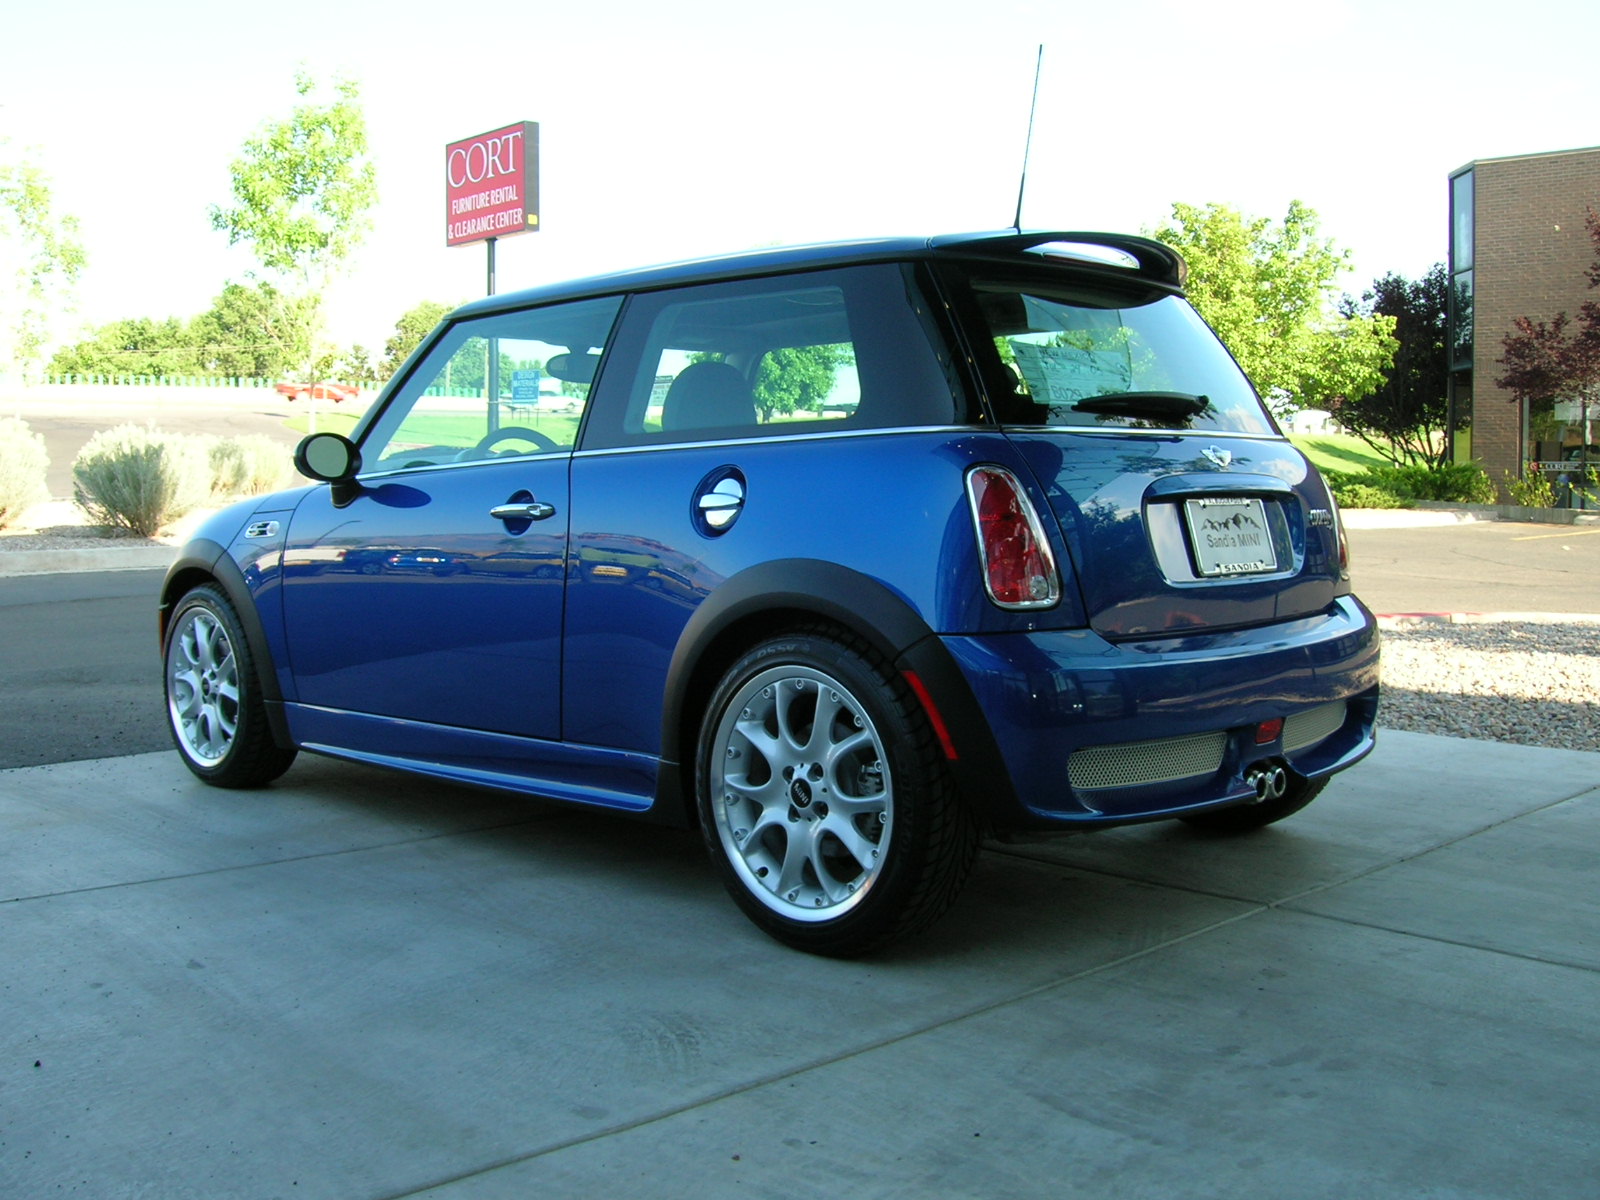 My car on the lot at Sandia Mini, waiting for me!